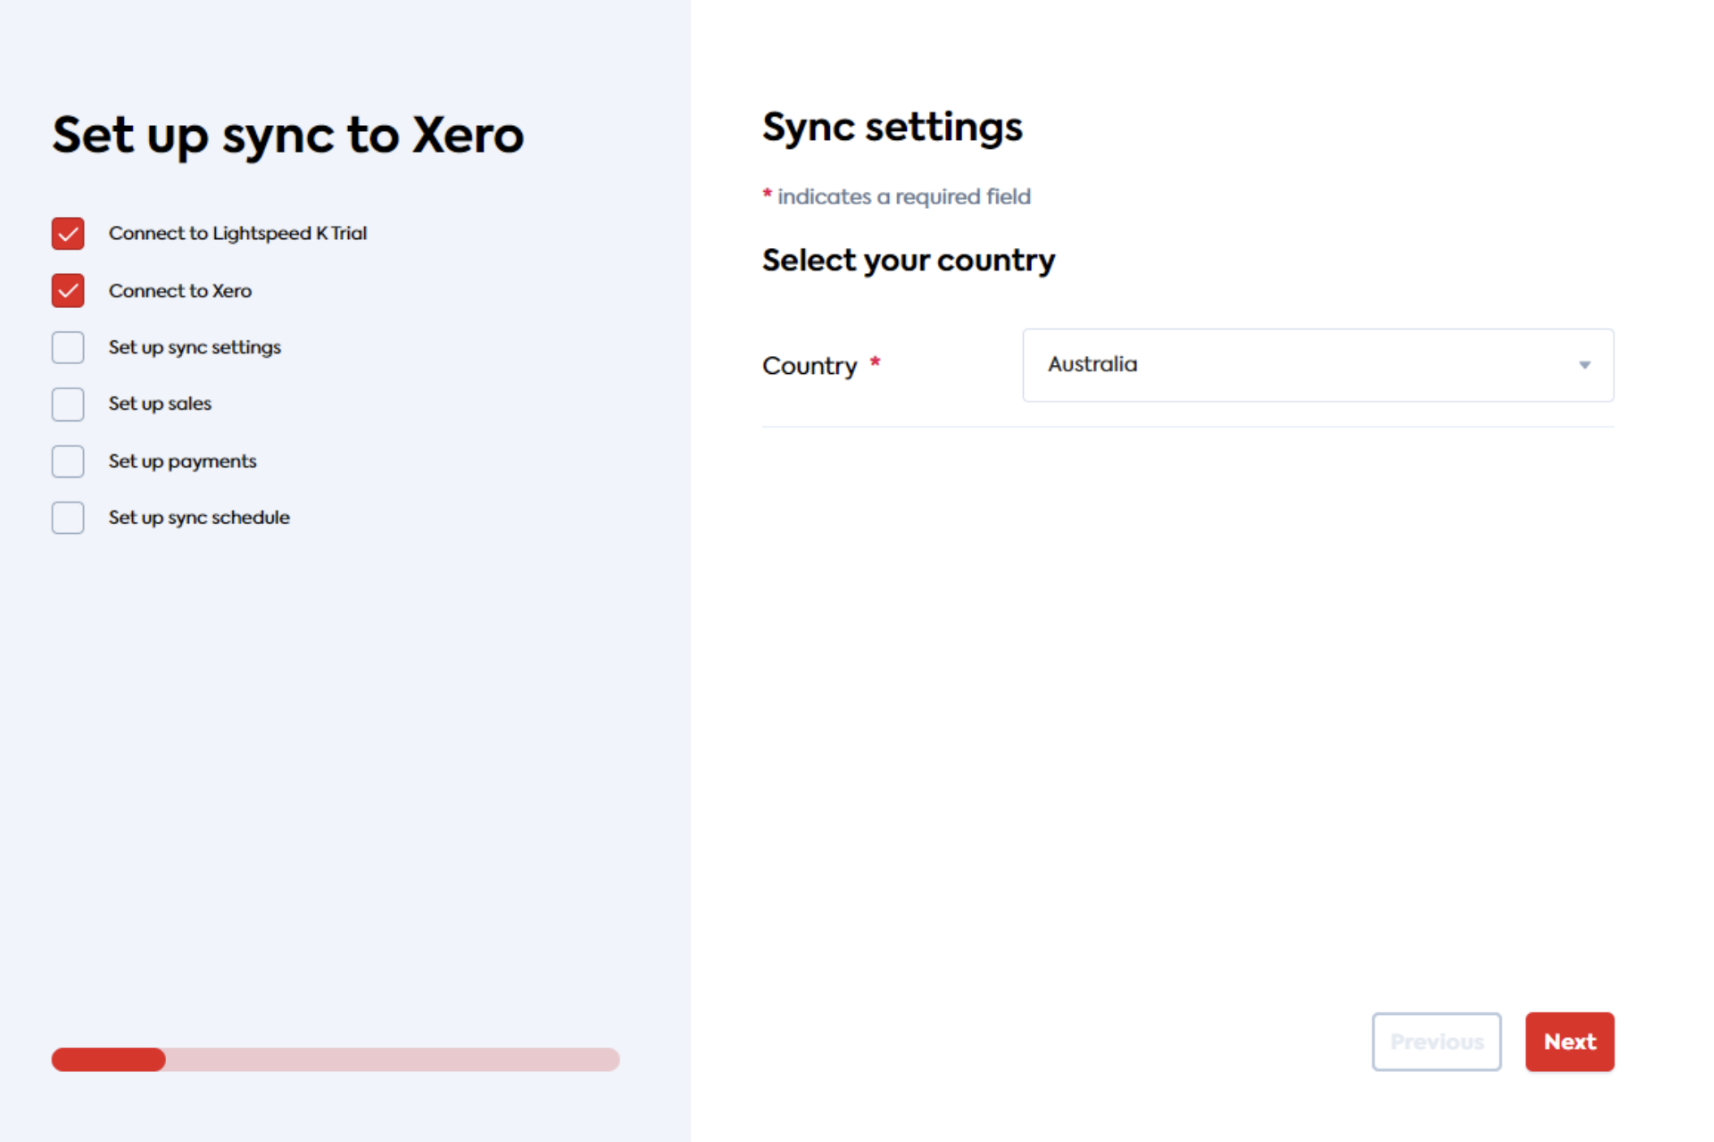 Sync settings page with drop-down menu for country selection